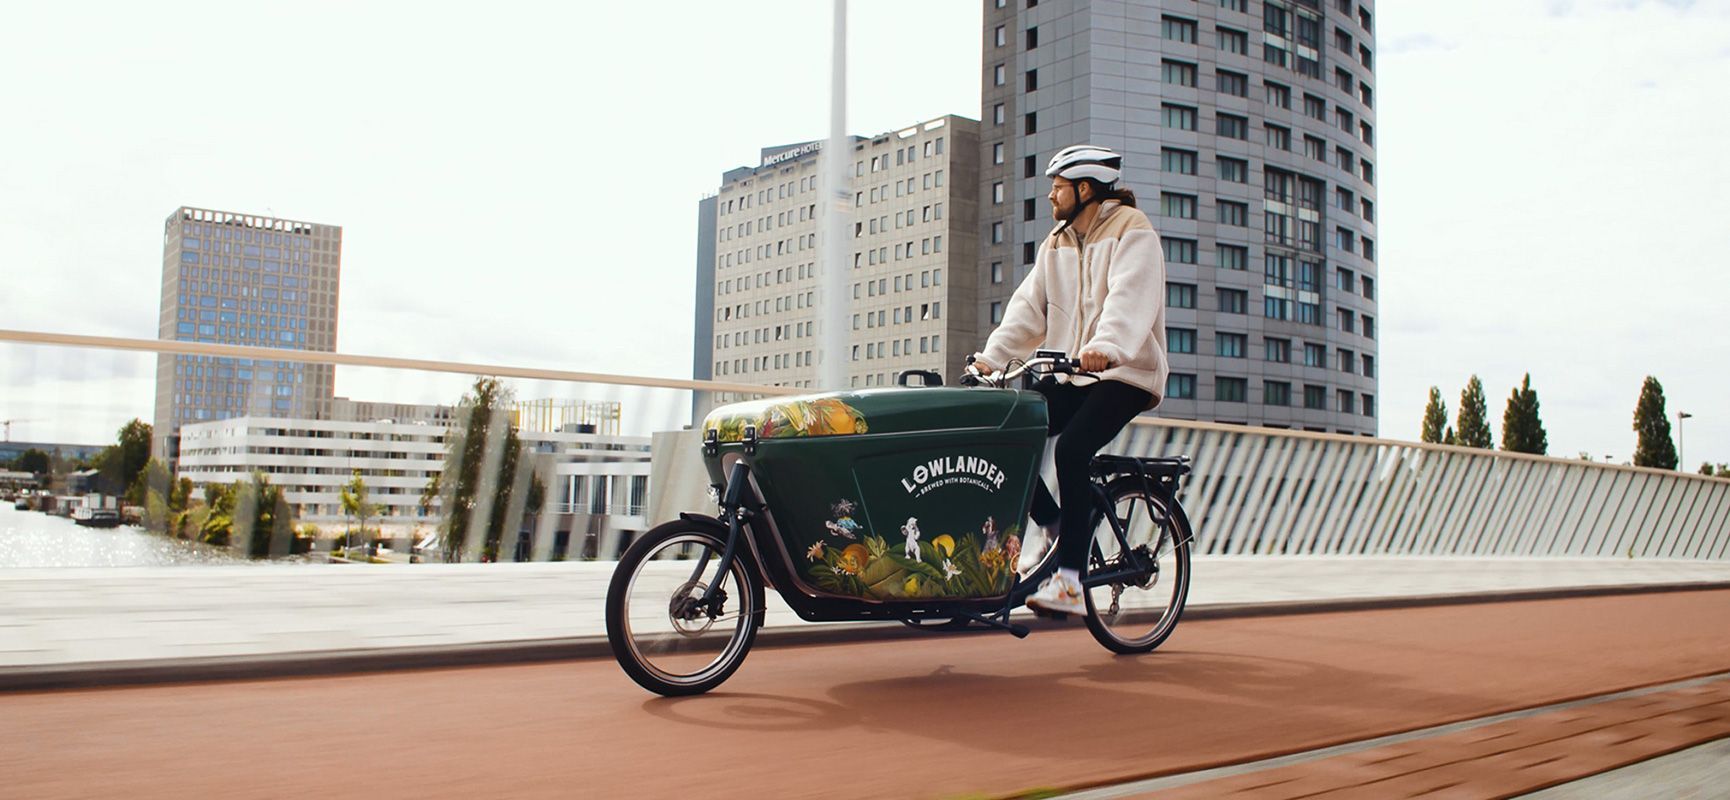 Beer brand Lowlander braves busy capital with electric cargo bike